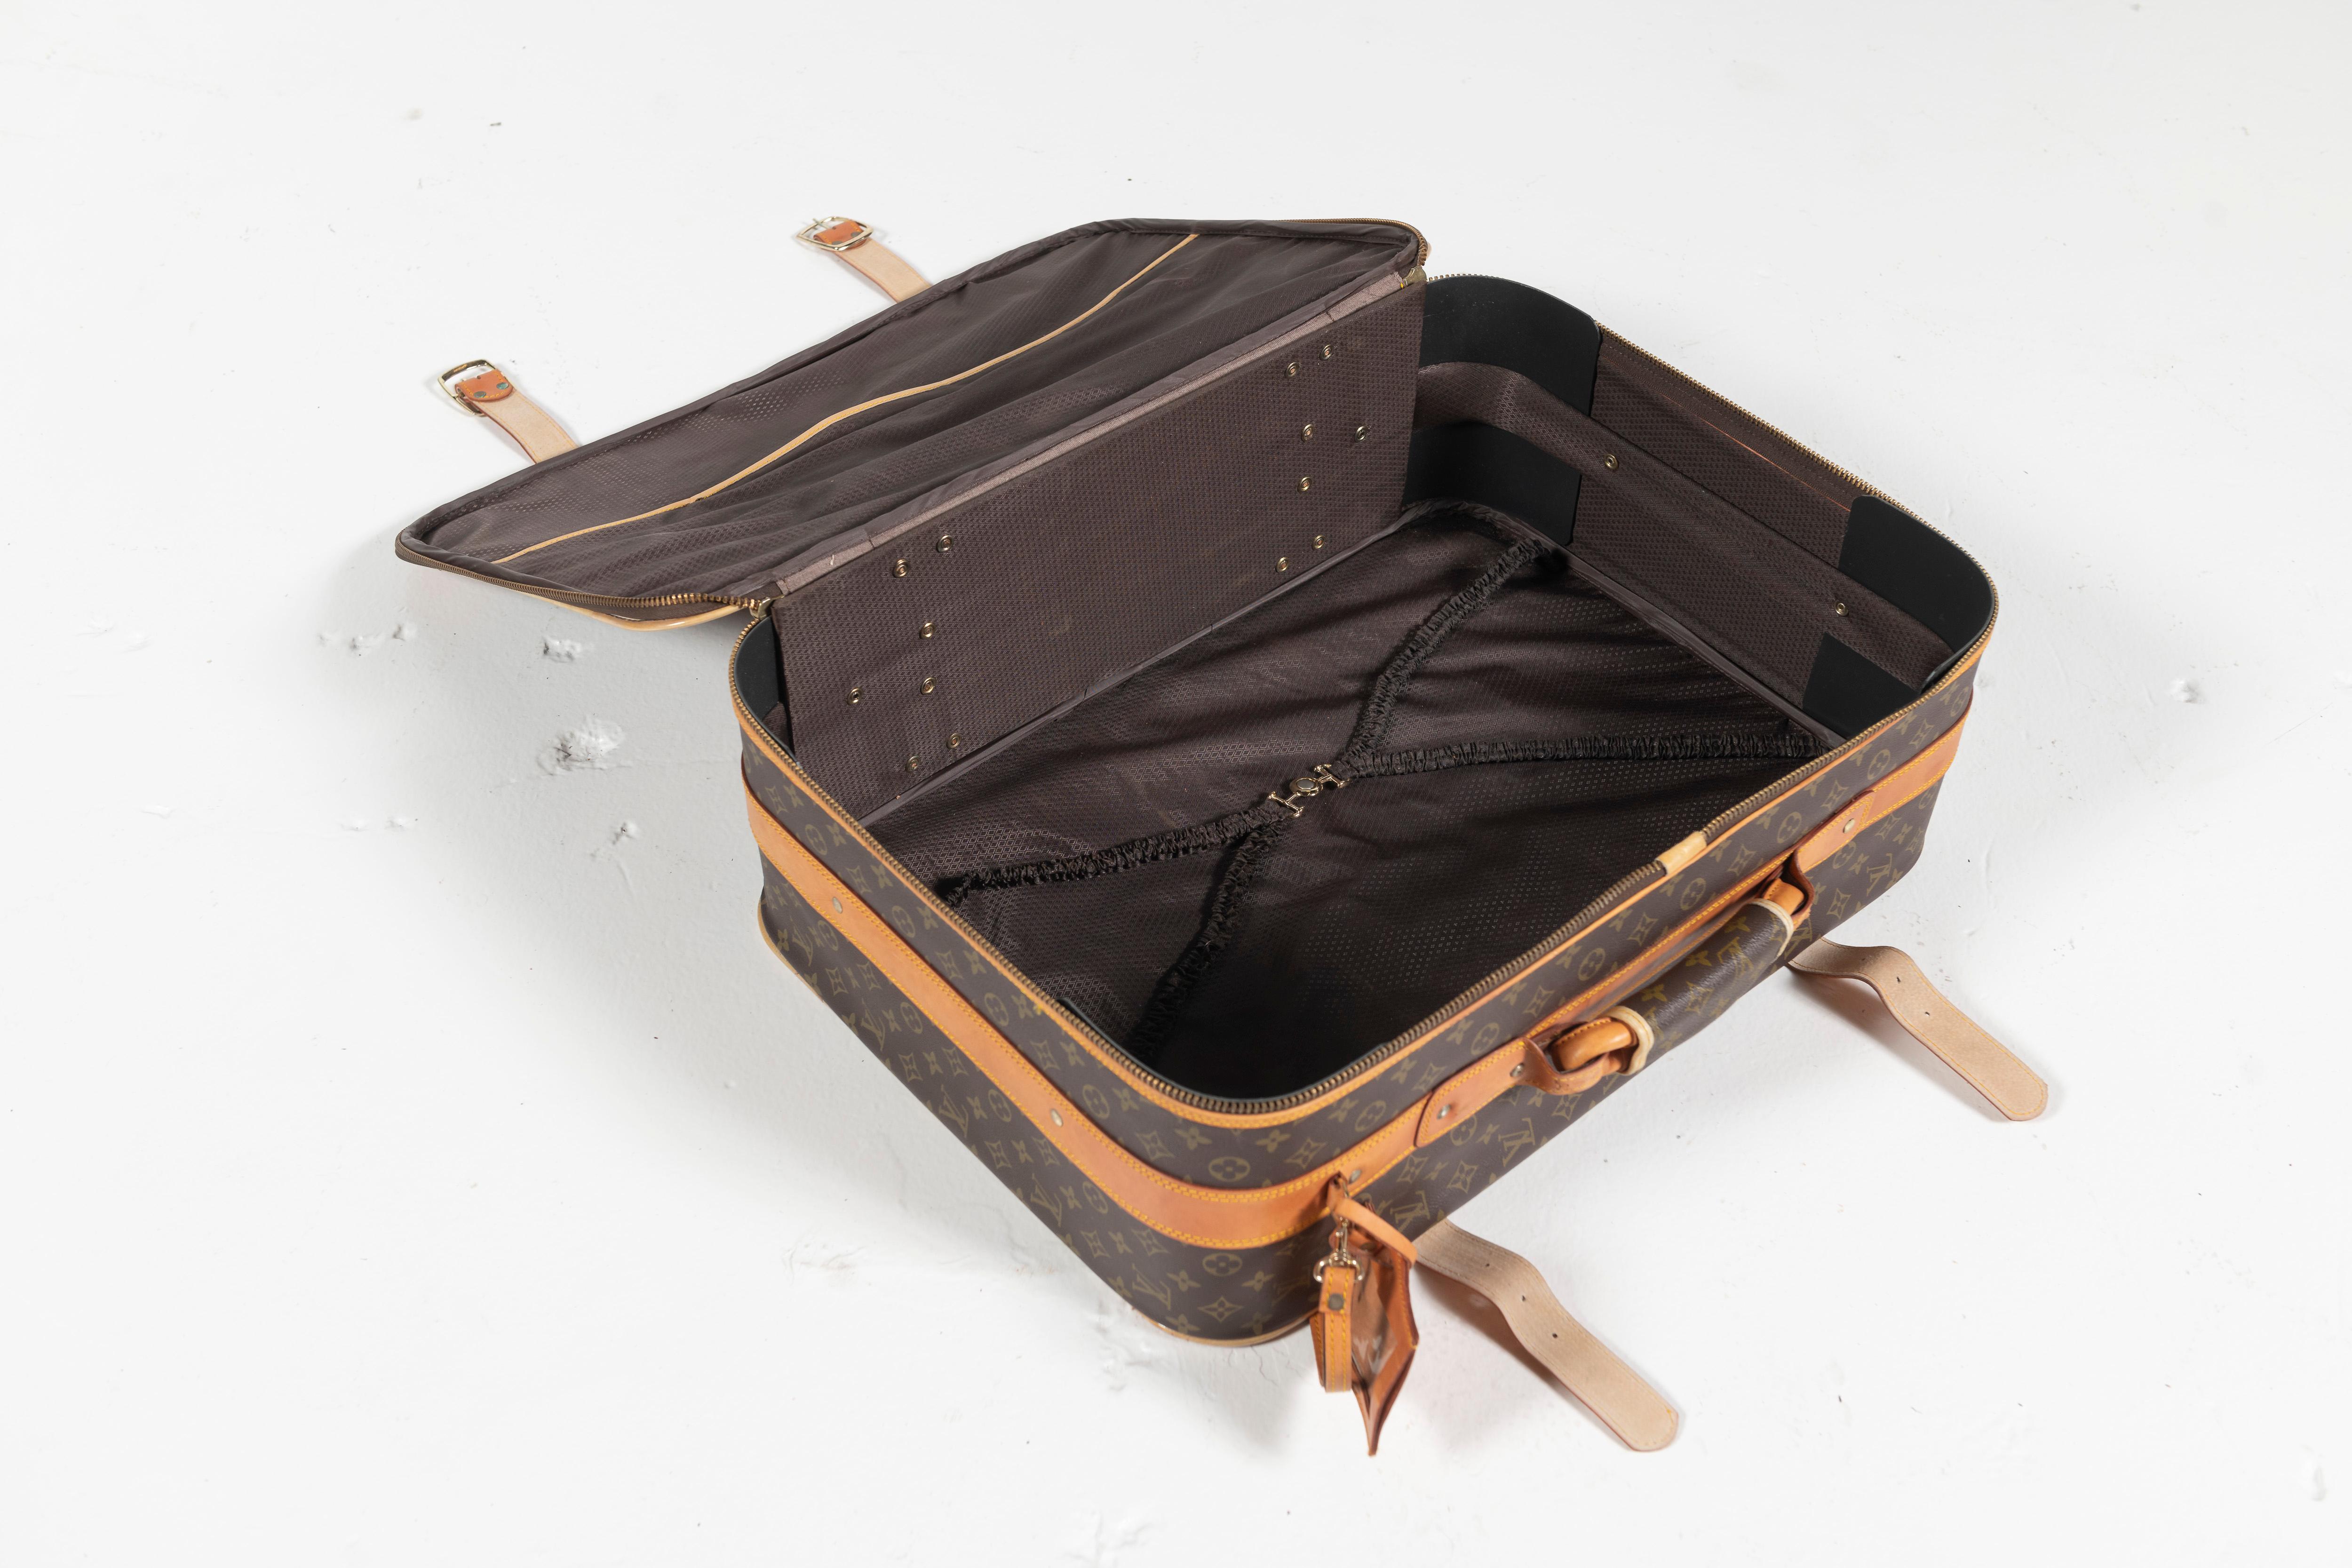 French Vintage Louis Vuitton Suitcase, Monogrammed Coated Canvas, Small-Sized For Sale